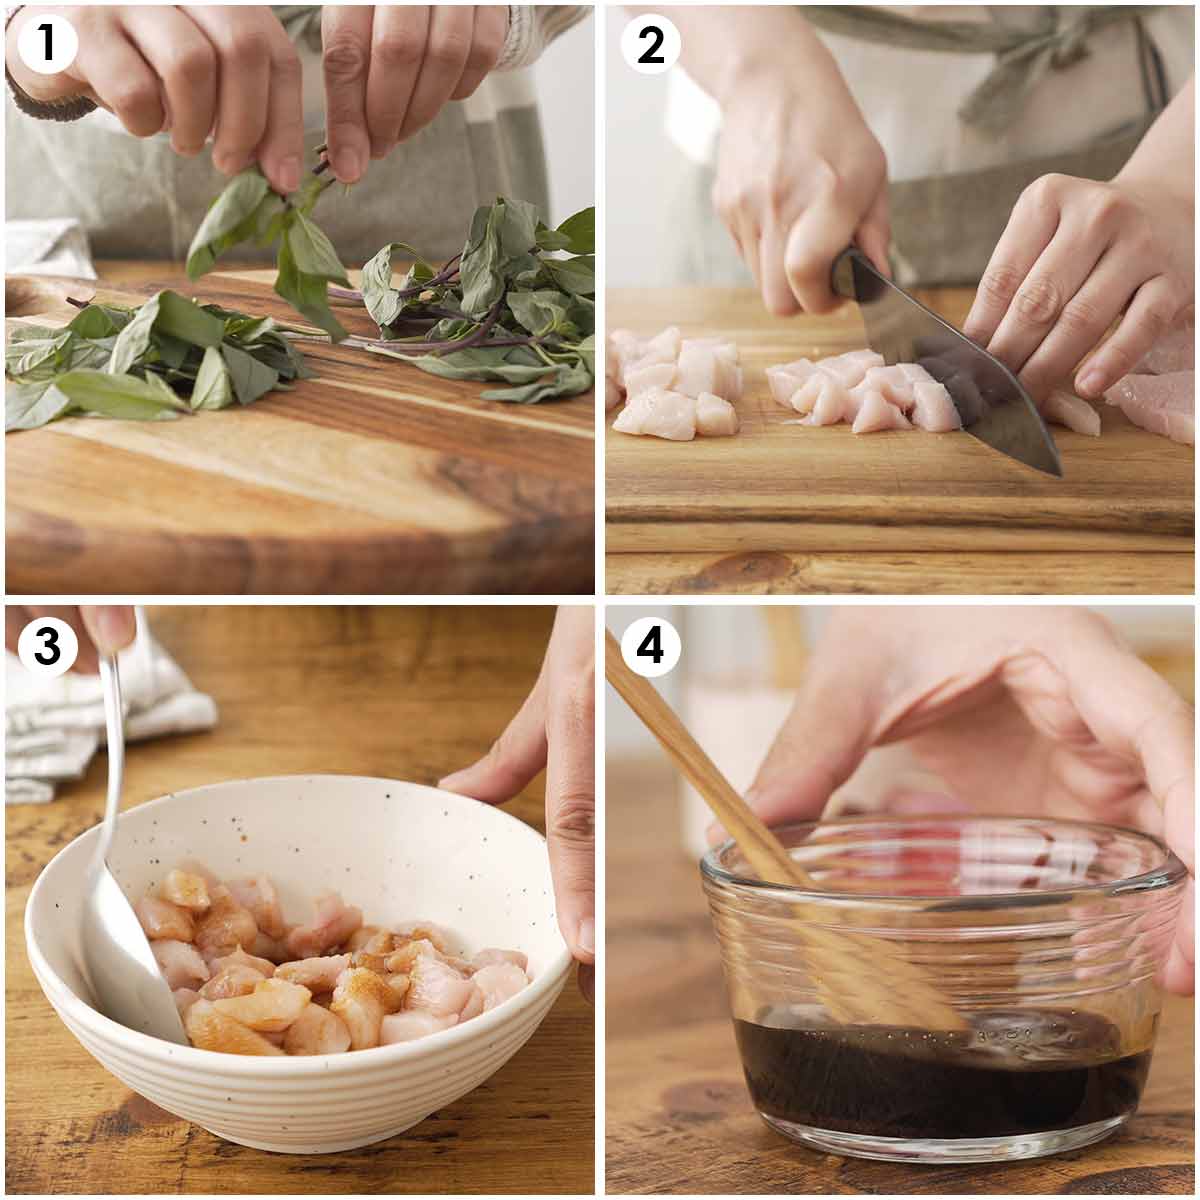 4 image collage showing how to prepare chicken, vegetables and stir fry sauce. 